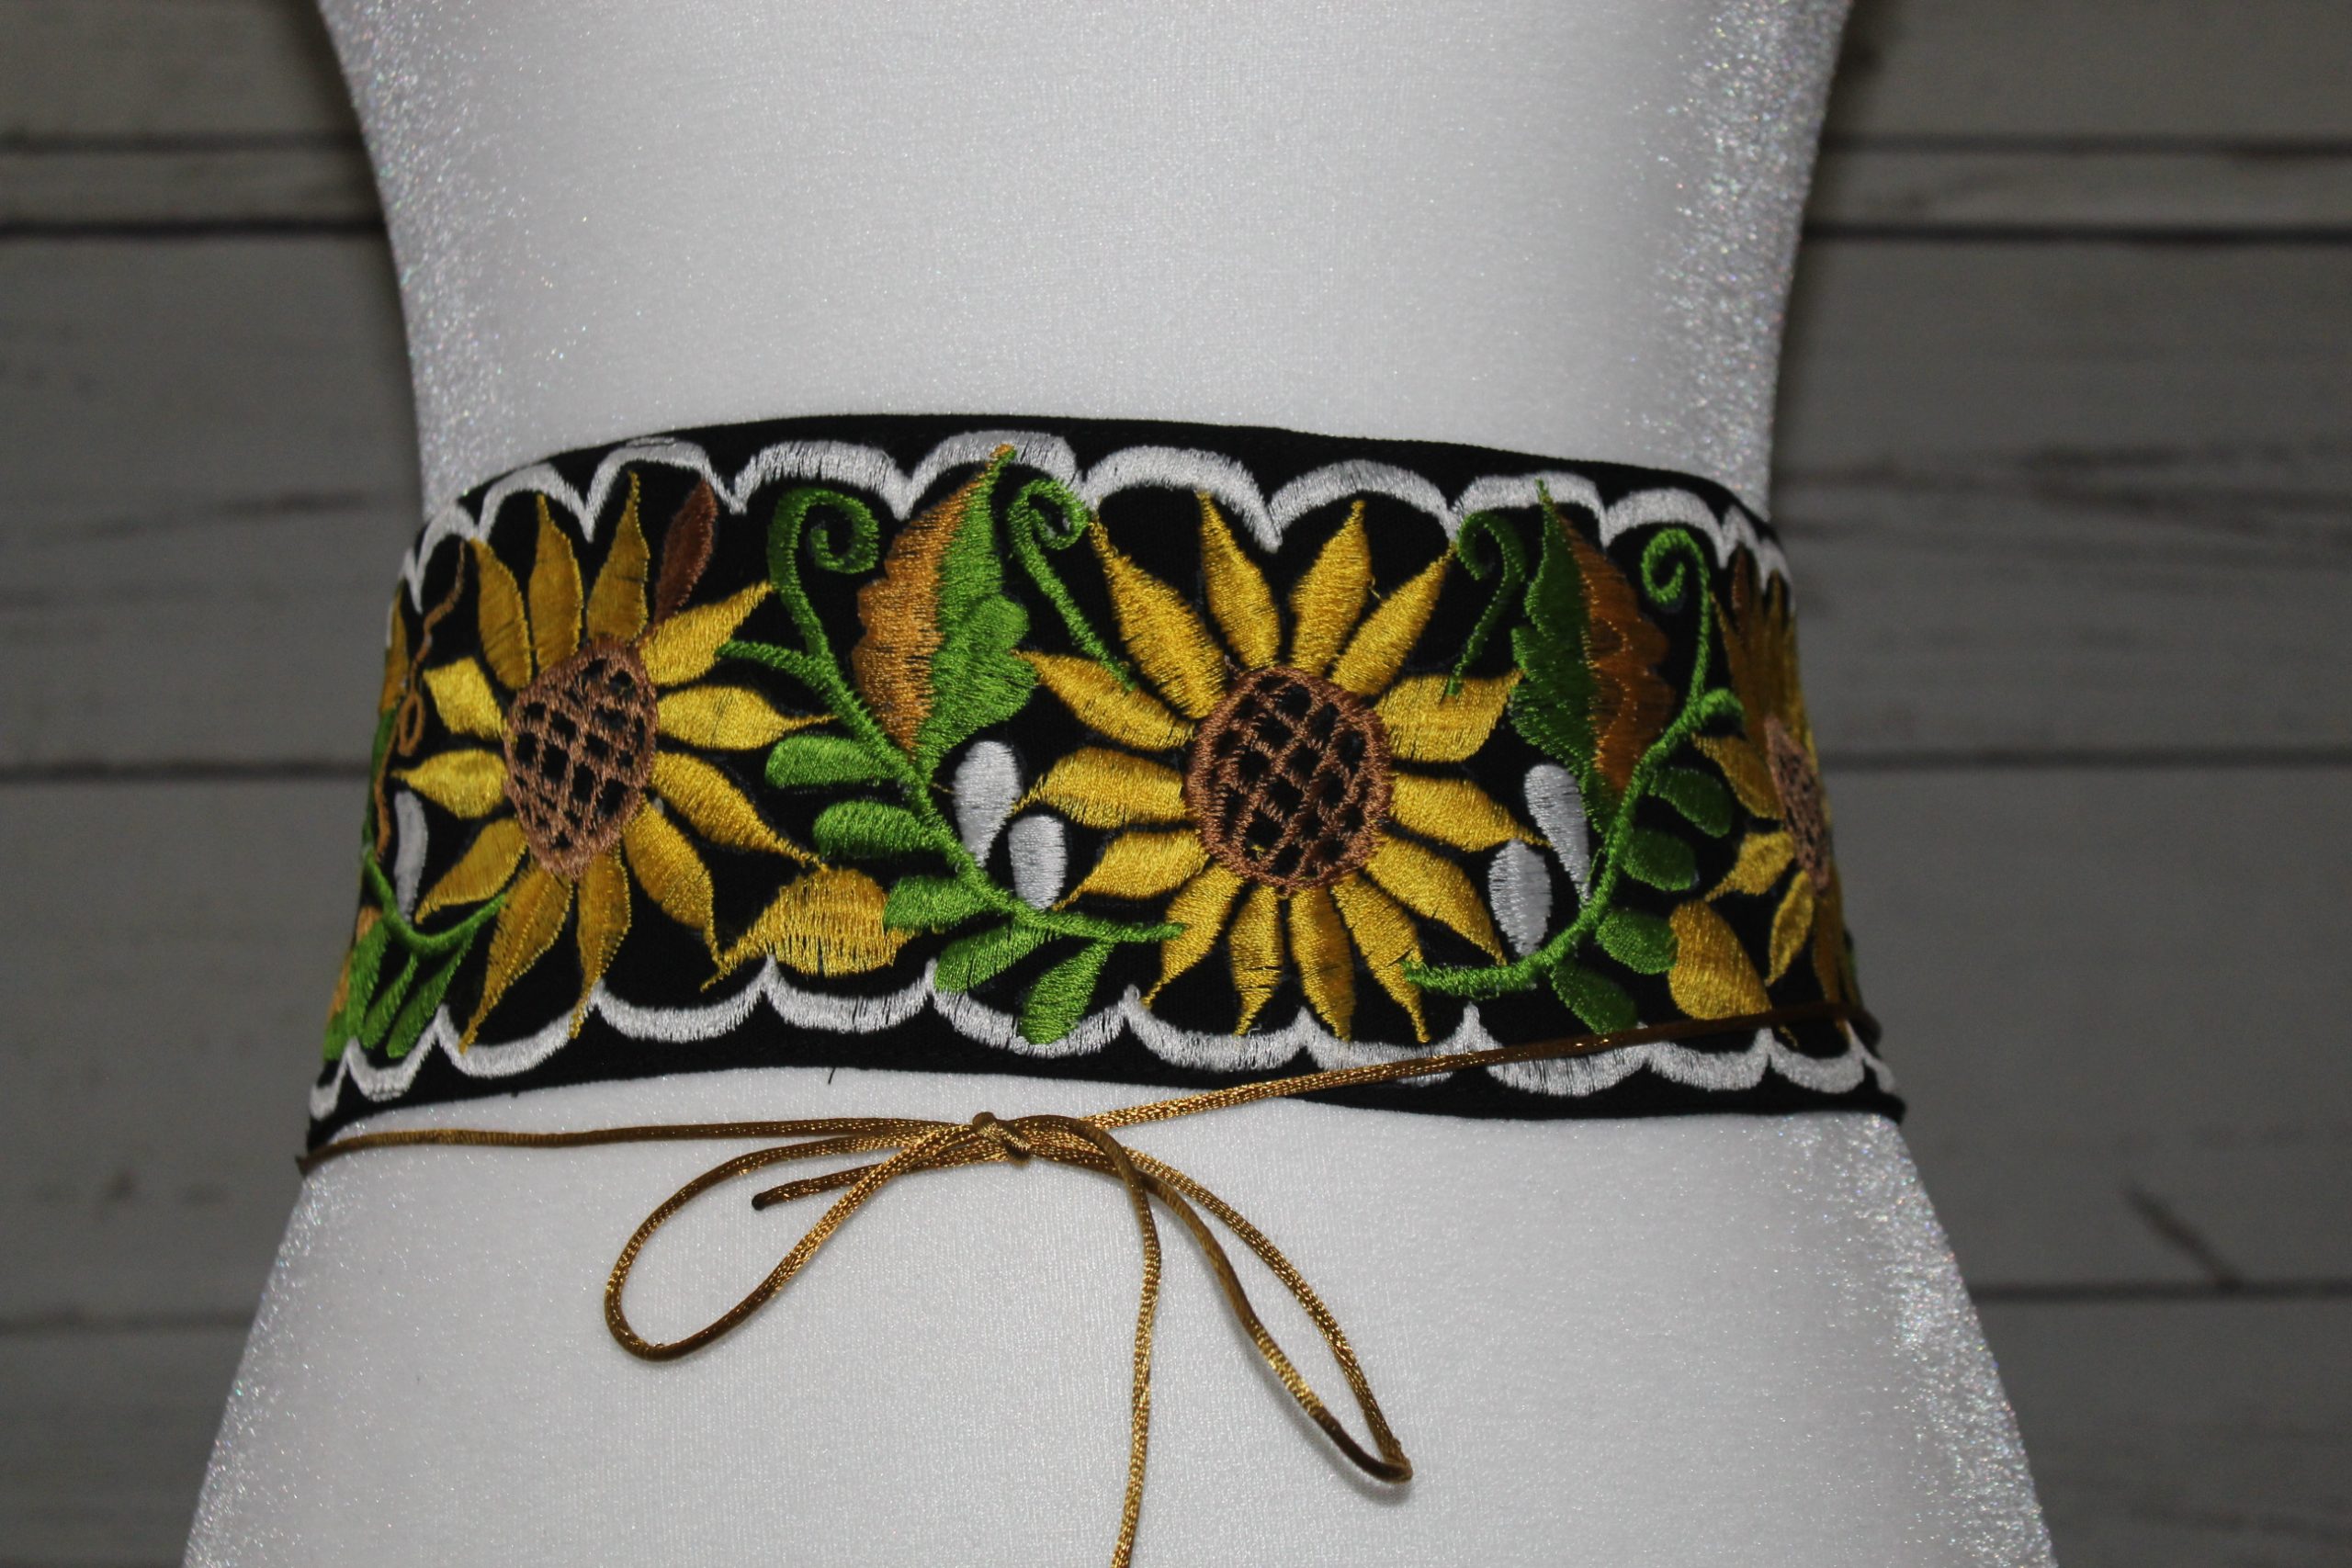 Black embordered belt with yellow sunflowers and white border